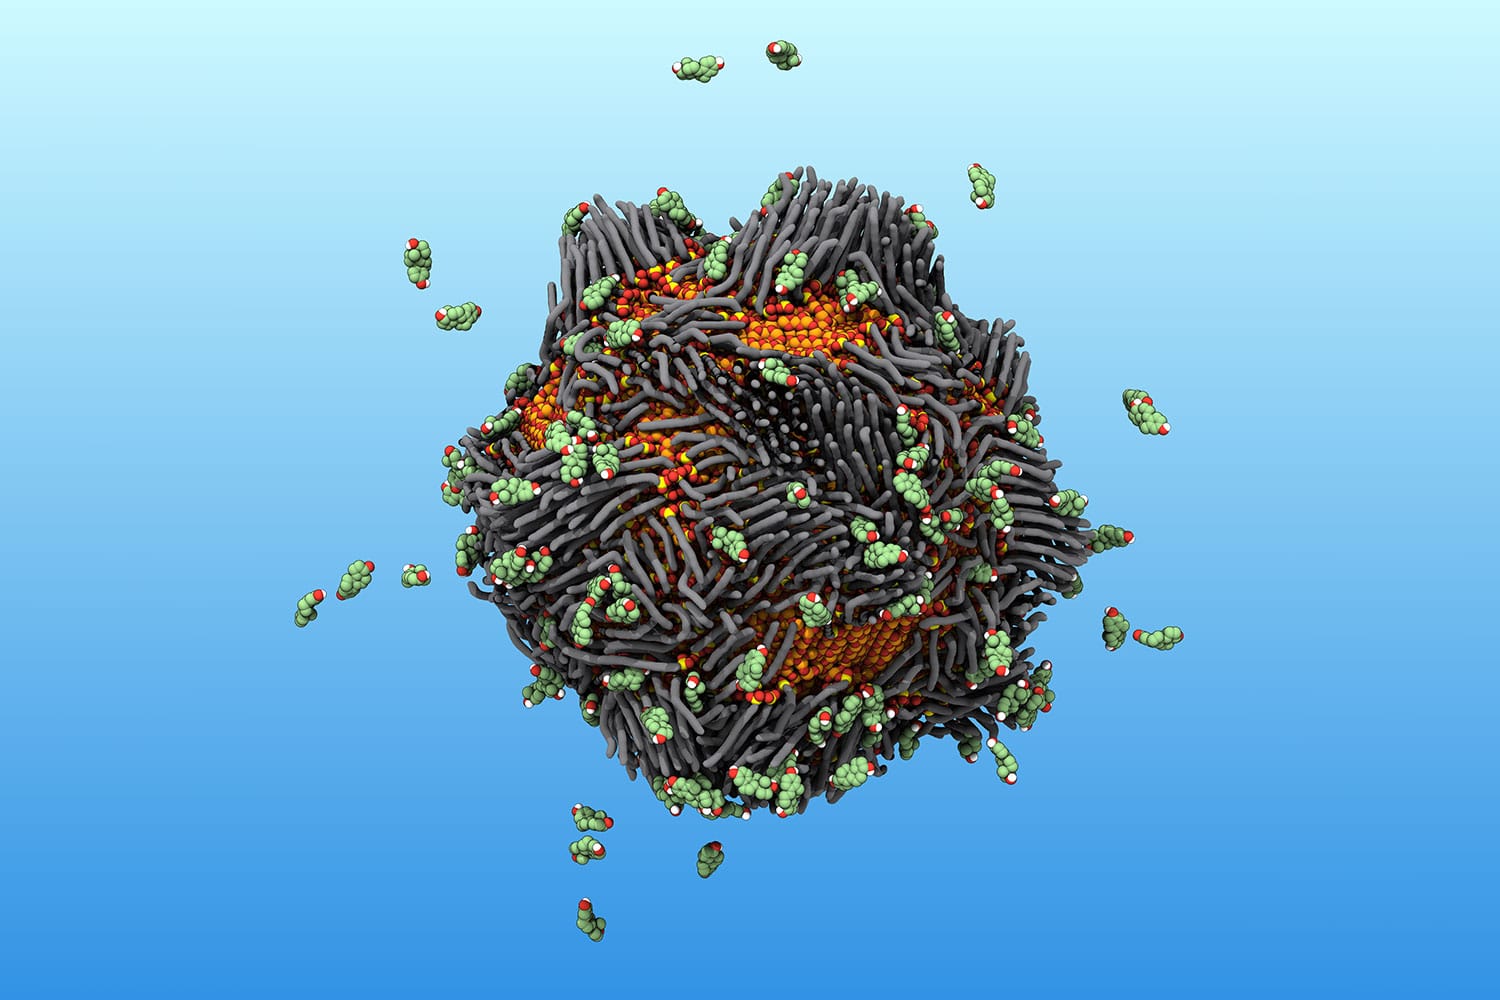 In this illustration, a “smart rust” nanoparticle attracts and traps estrogen molecules, which are represented by the floating objects.